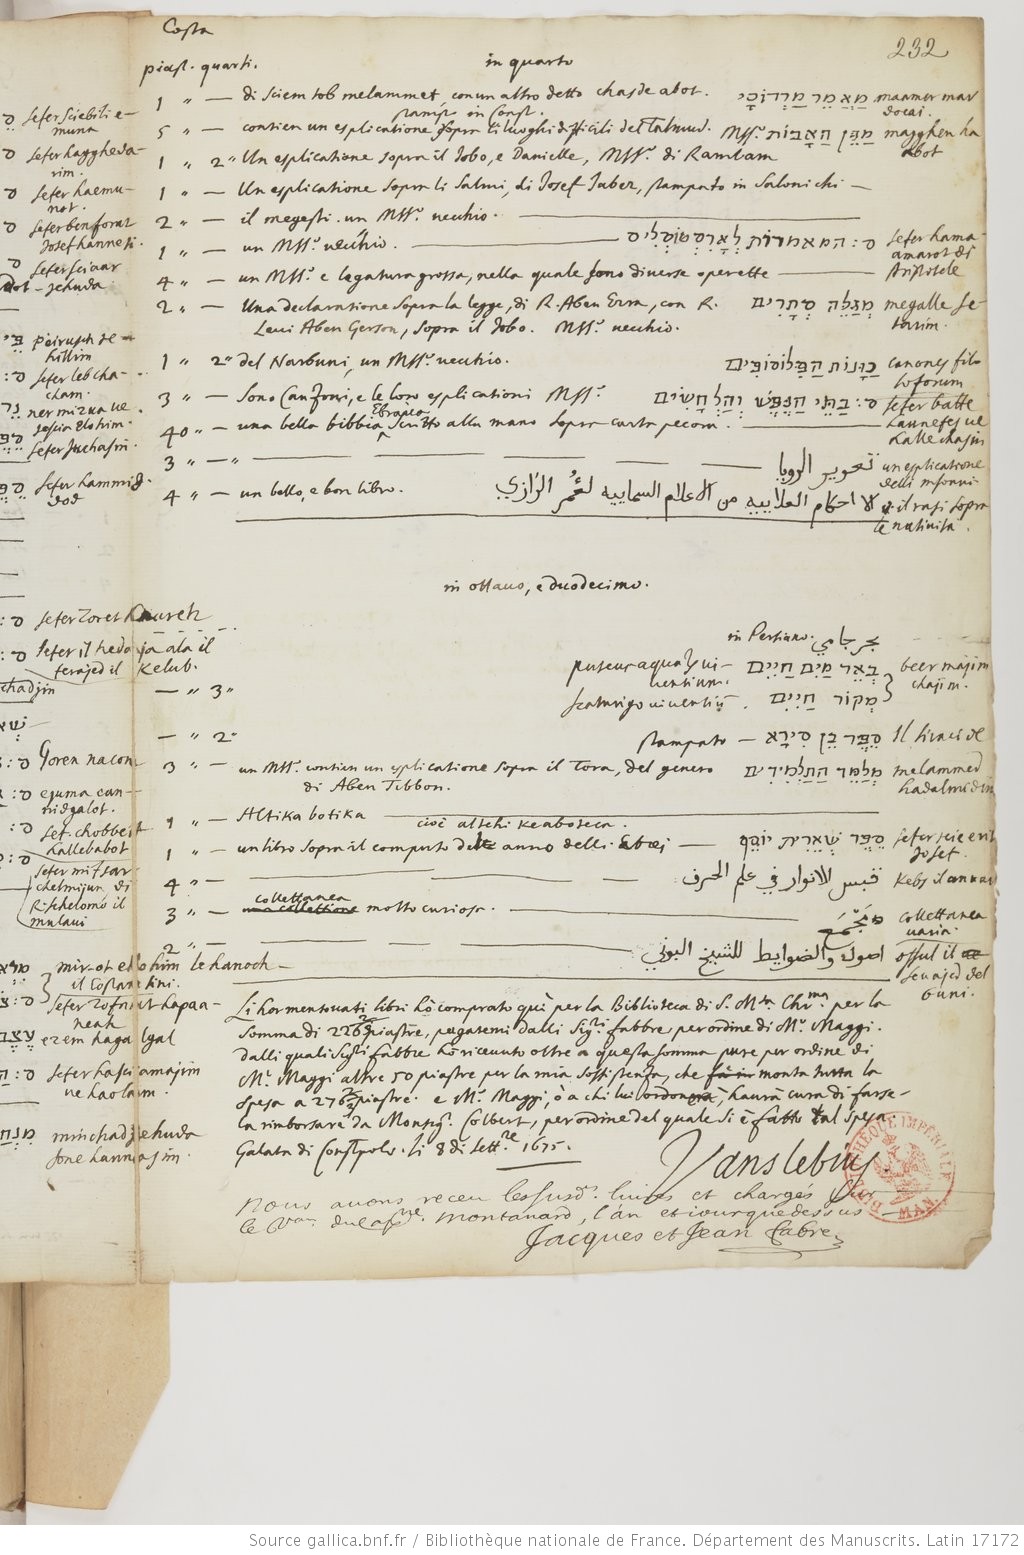 Example of a list of acquired titles by Vansleb; BnF, MS Latin 17172